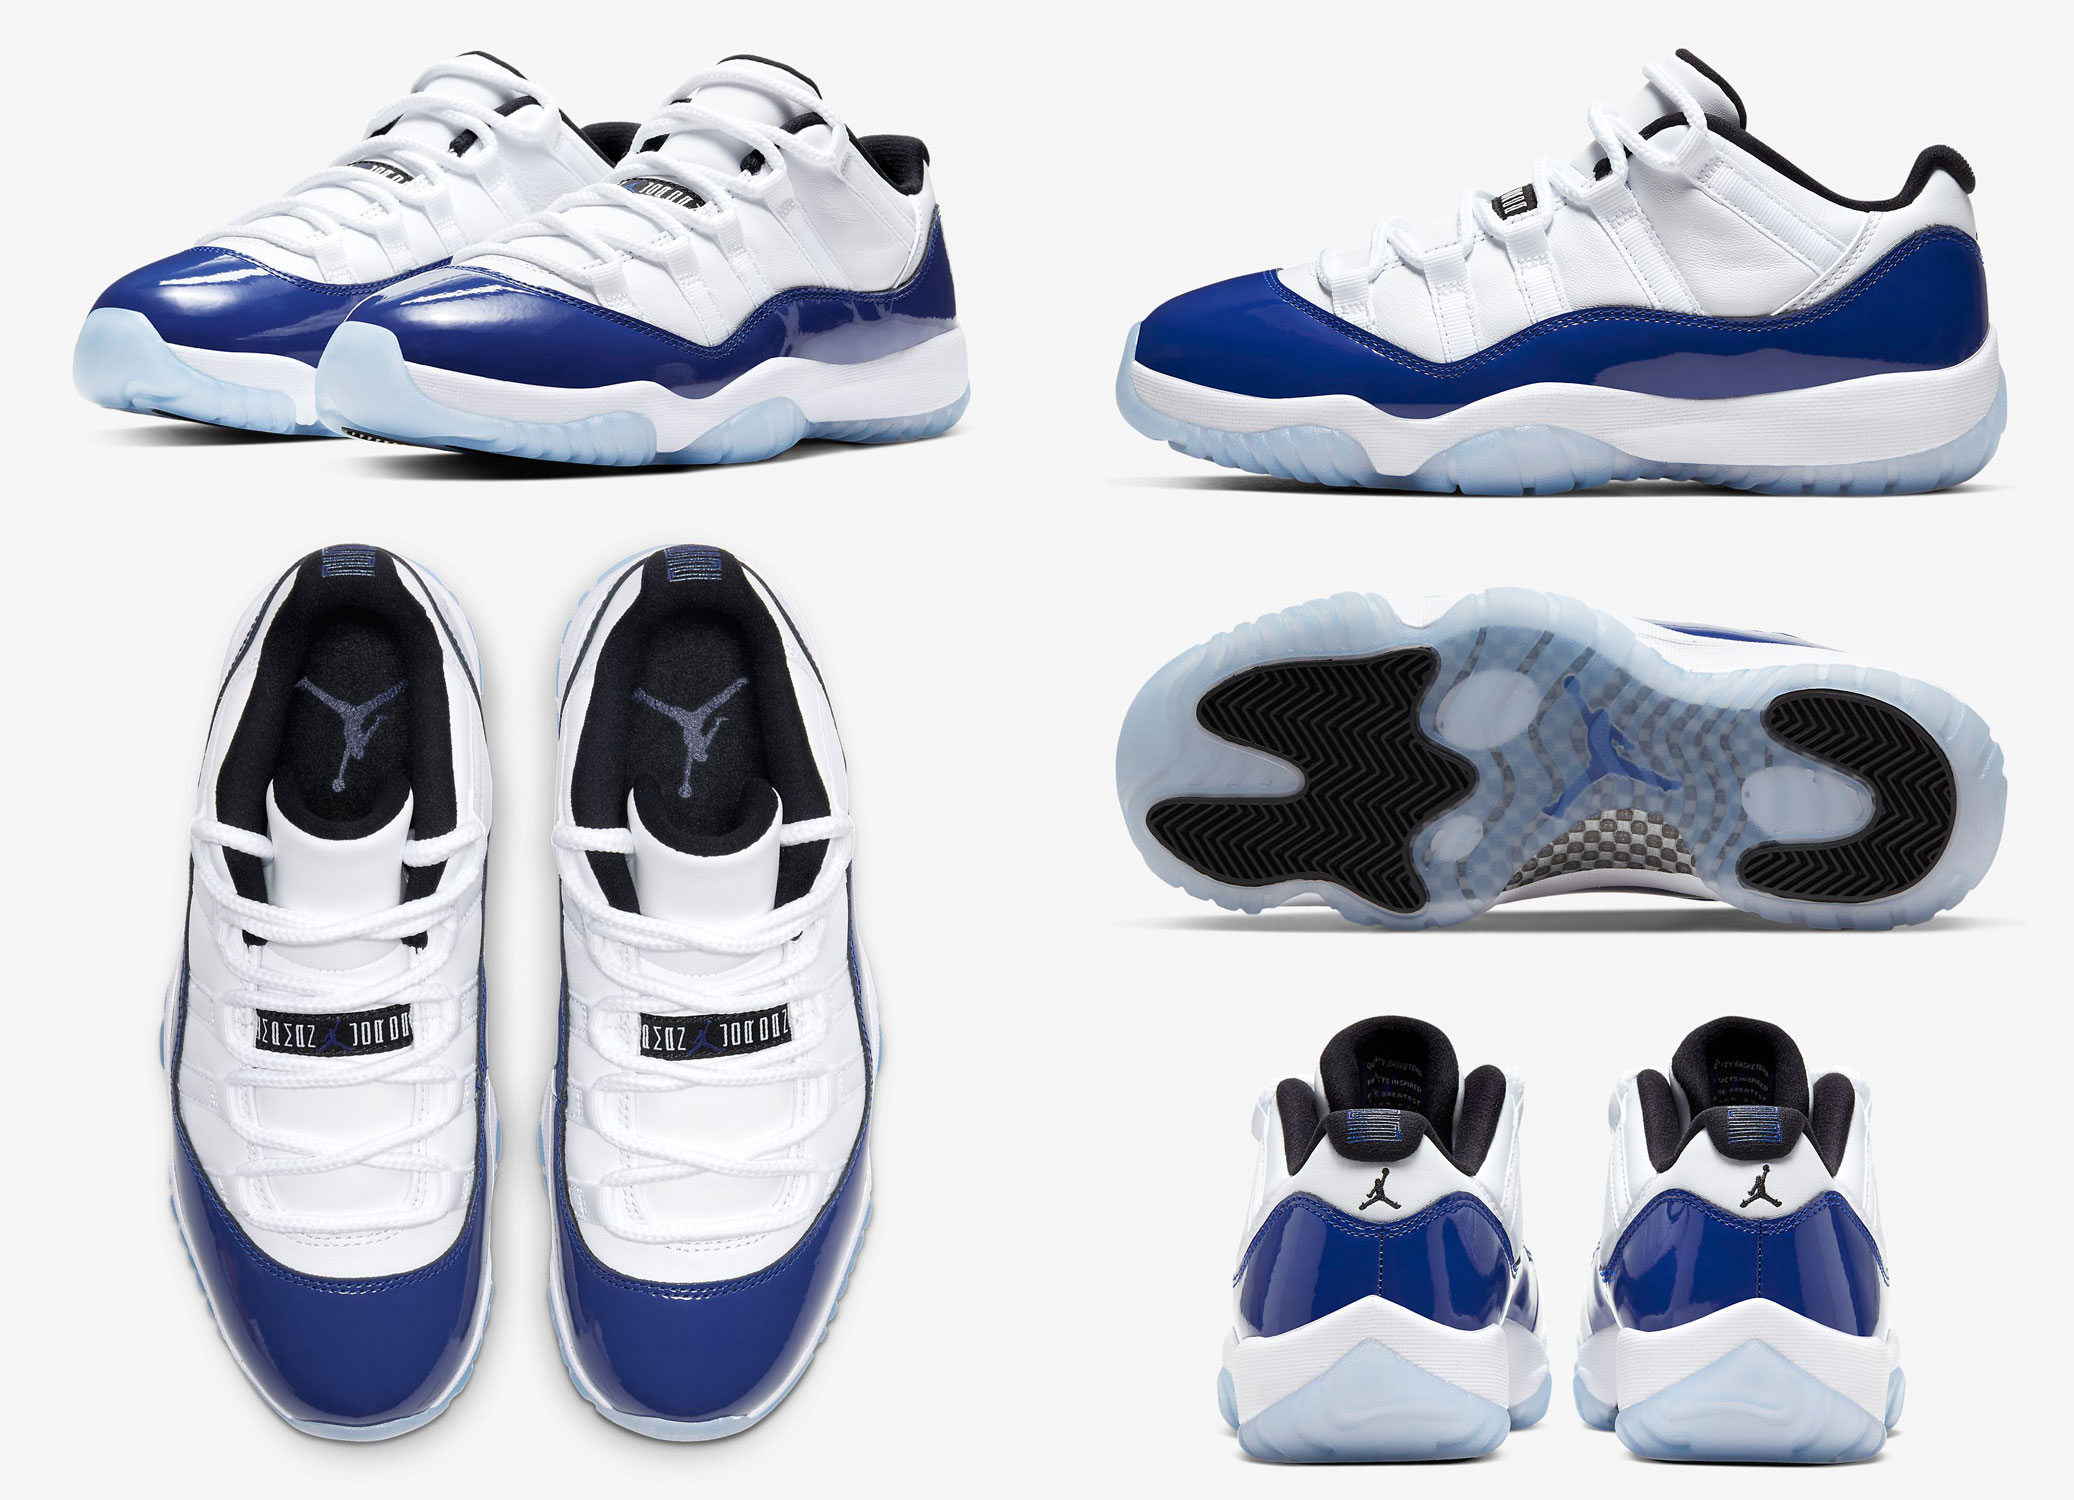 outfits to wear with concords